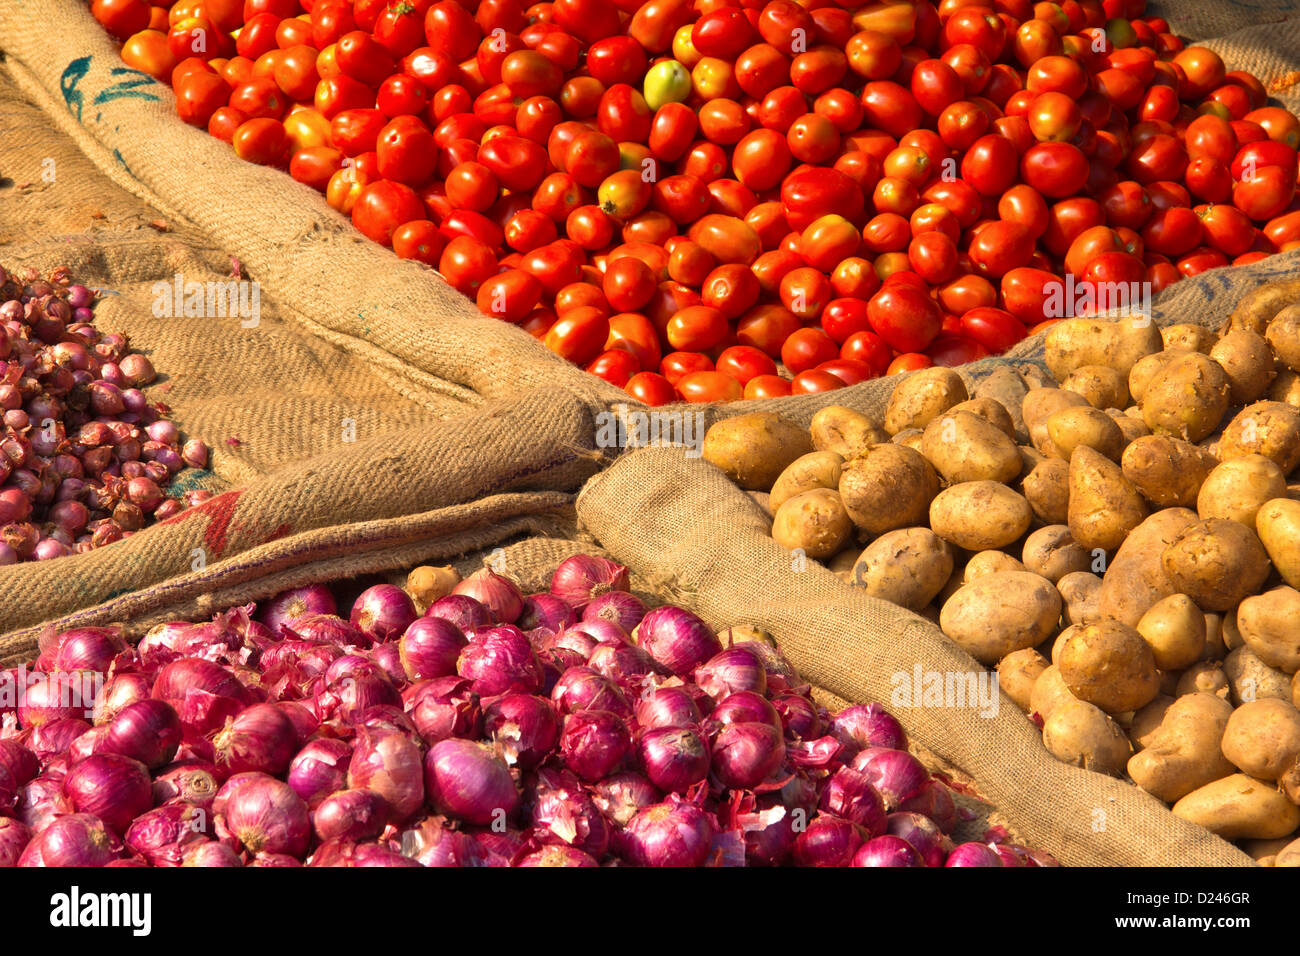 VEGETABLES FOR SALE TOMATOES ONIONS AND POTATOES IN A MARKET IN SOUTHERN INDIA Stock Photo